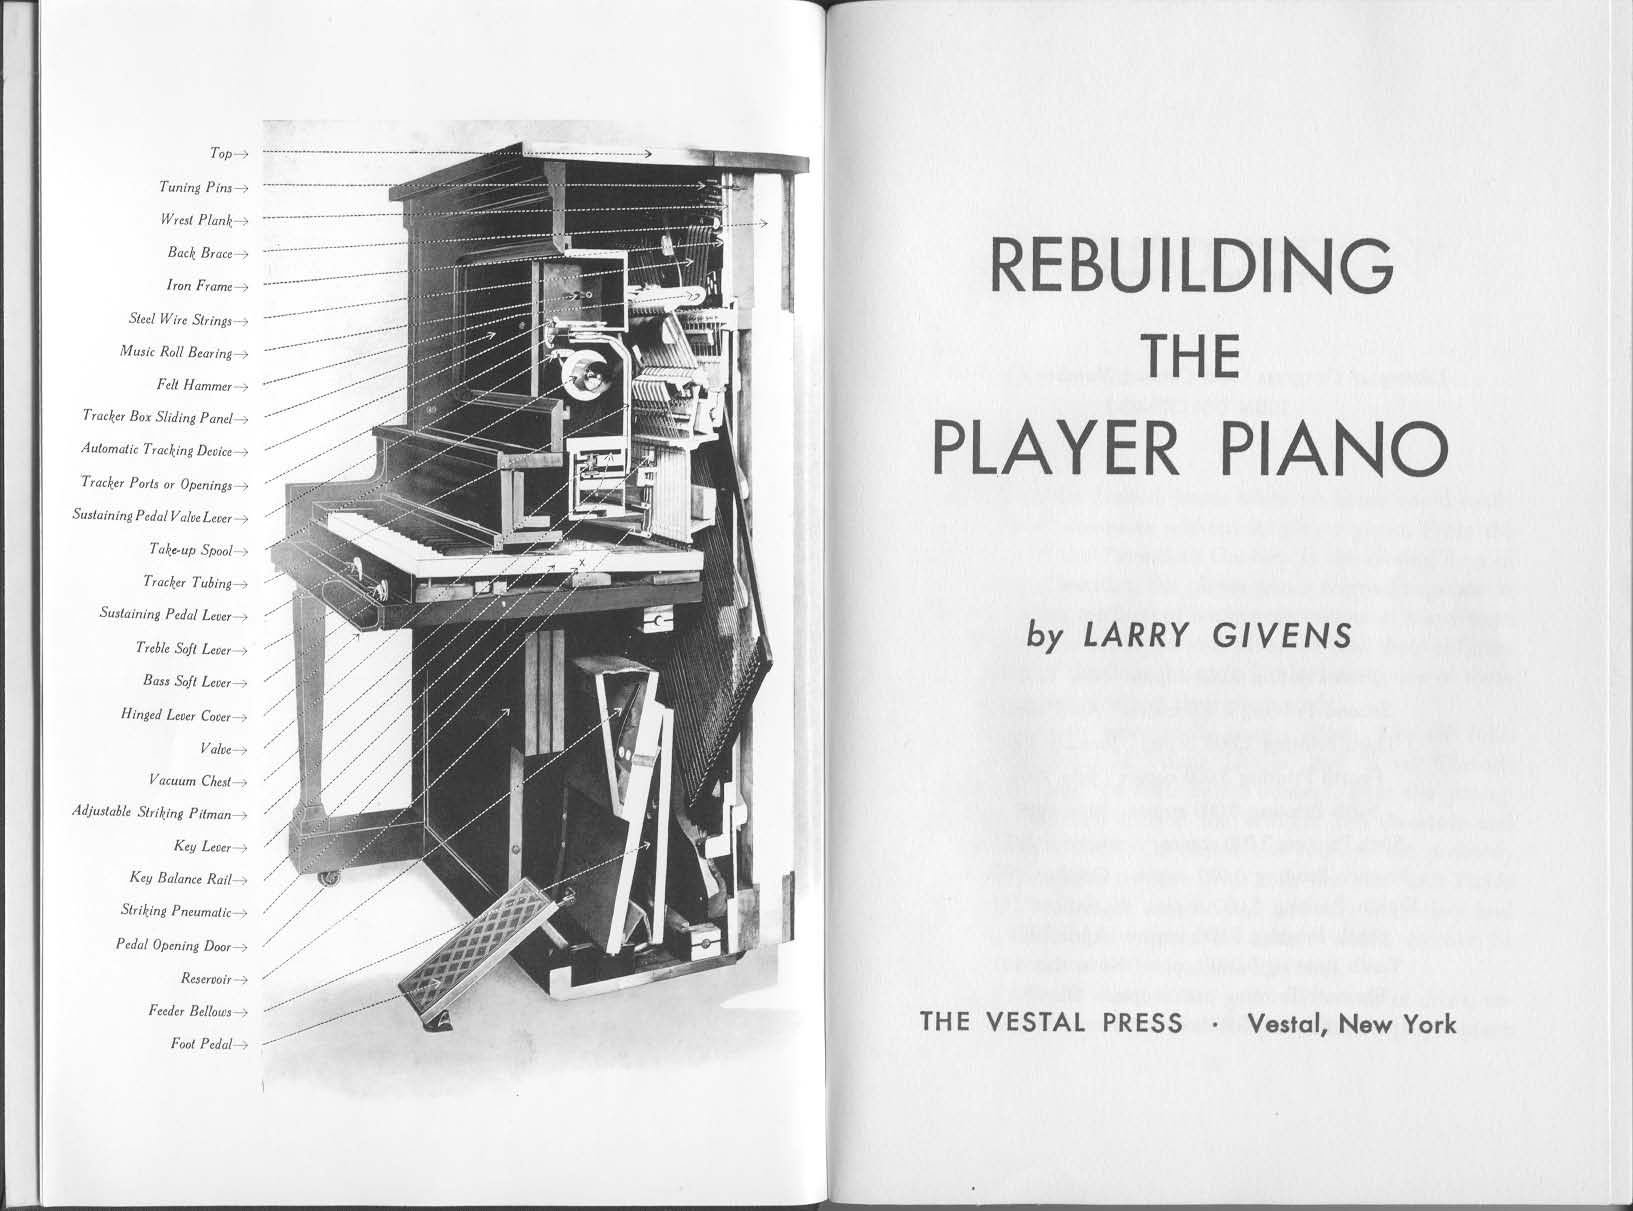 modo Socialismo Marty Fielding Rebuilding the Player Piano" by Larry Givens